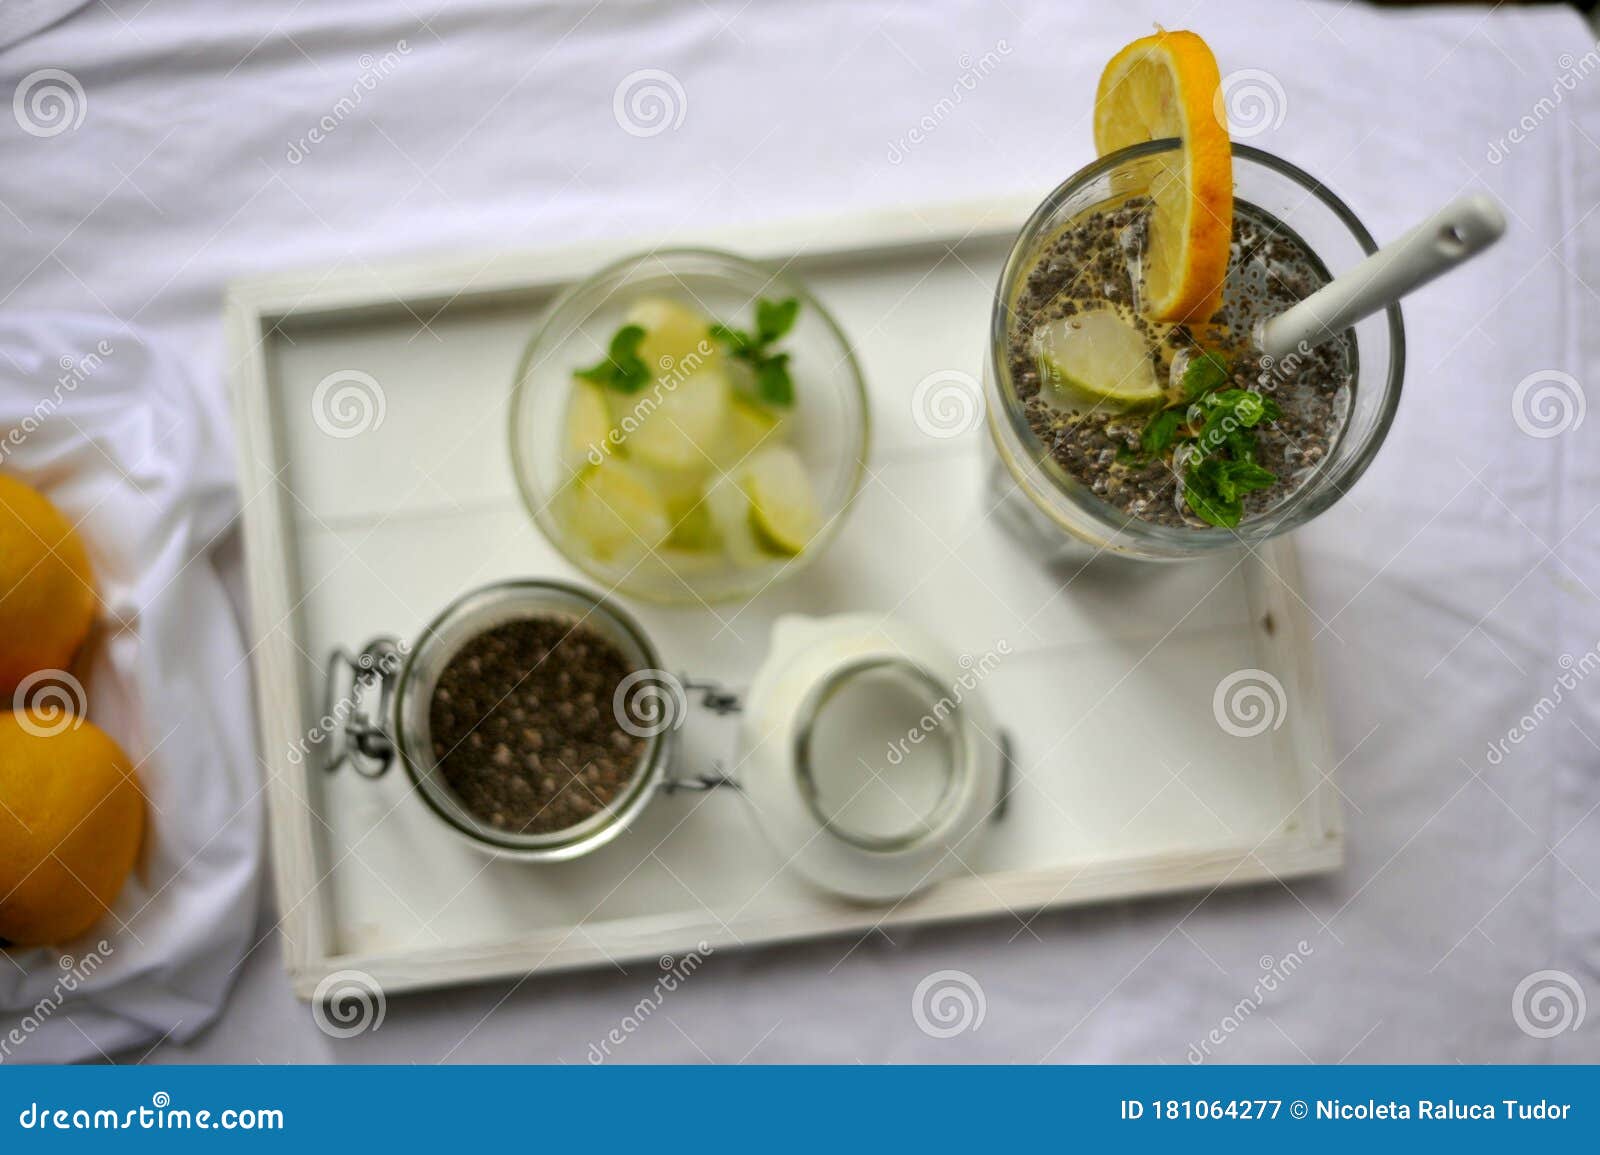 chia water and lemon an excellent source of omega-3 fatty acids, rich in antioxidants, and they provide fiber, iron, and calci